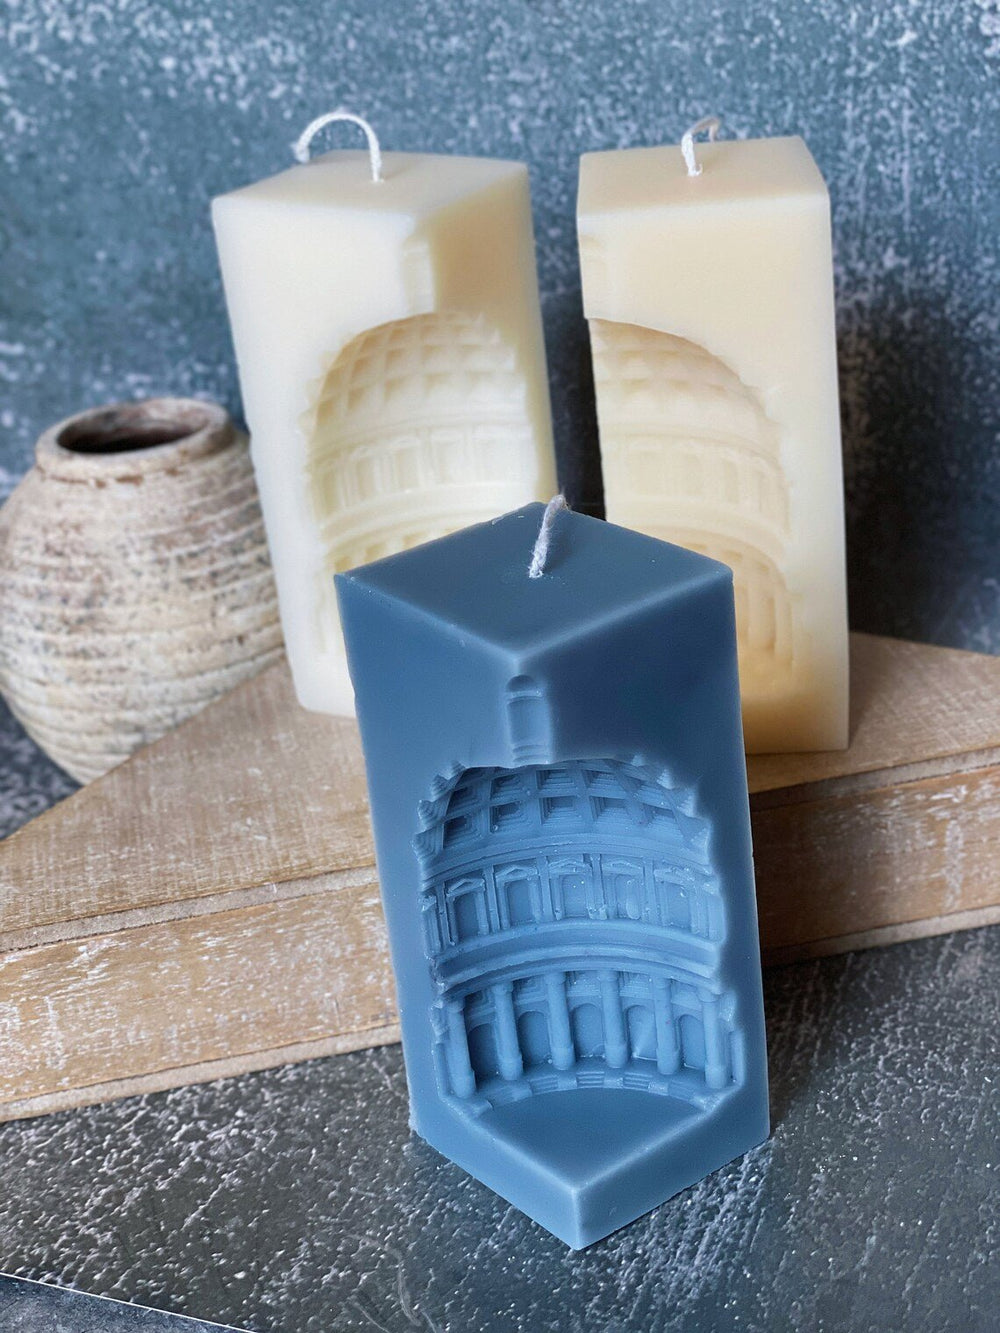 When In Rome - Crazy About Candles